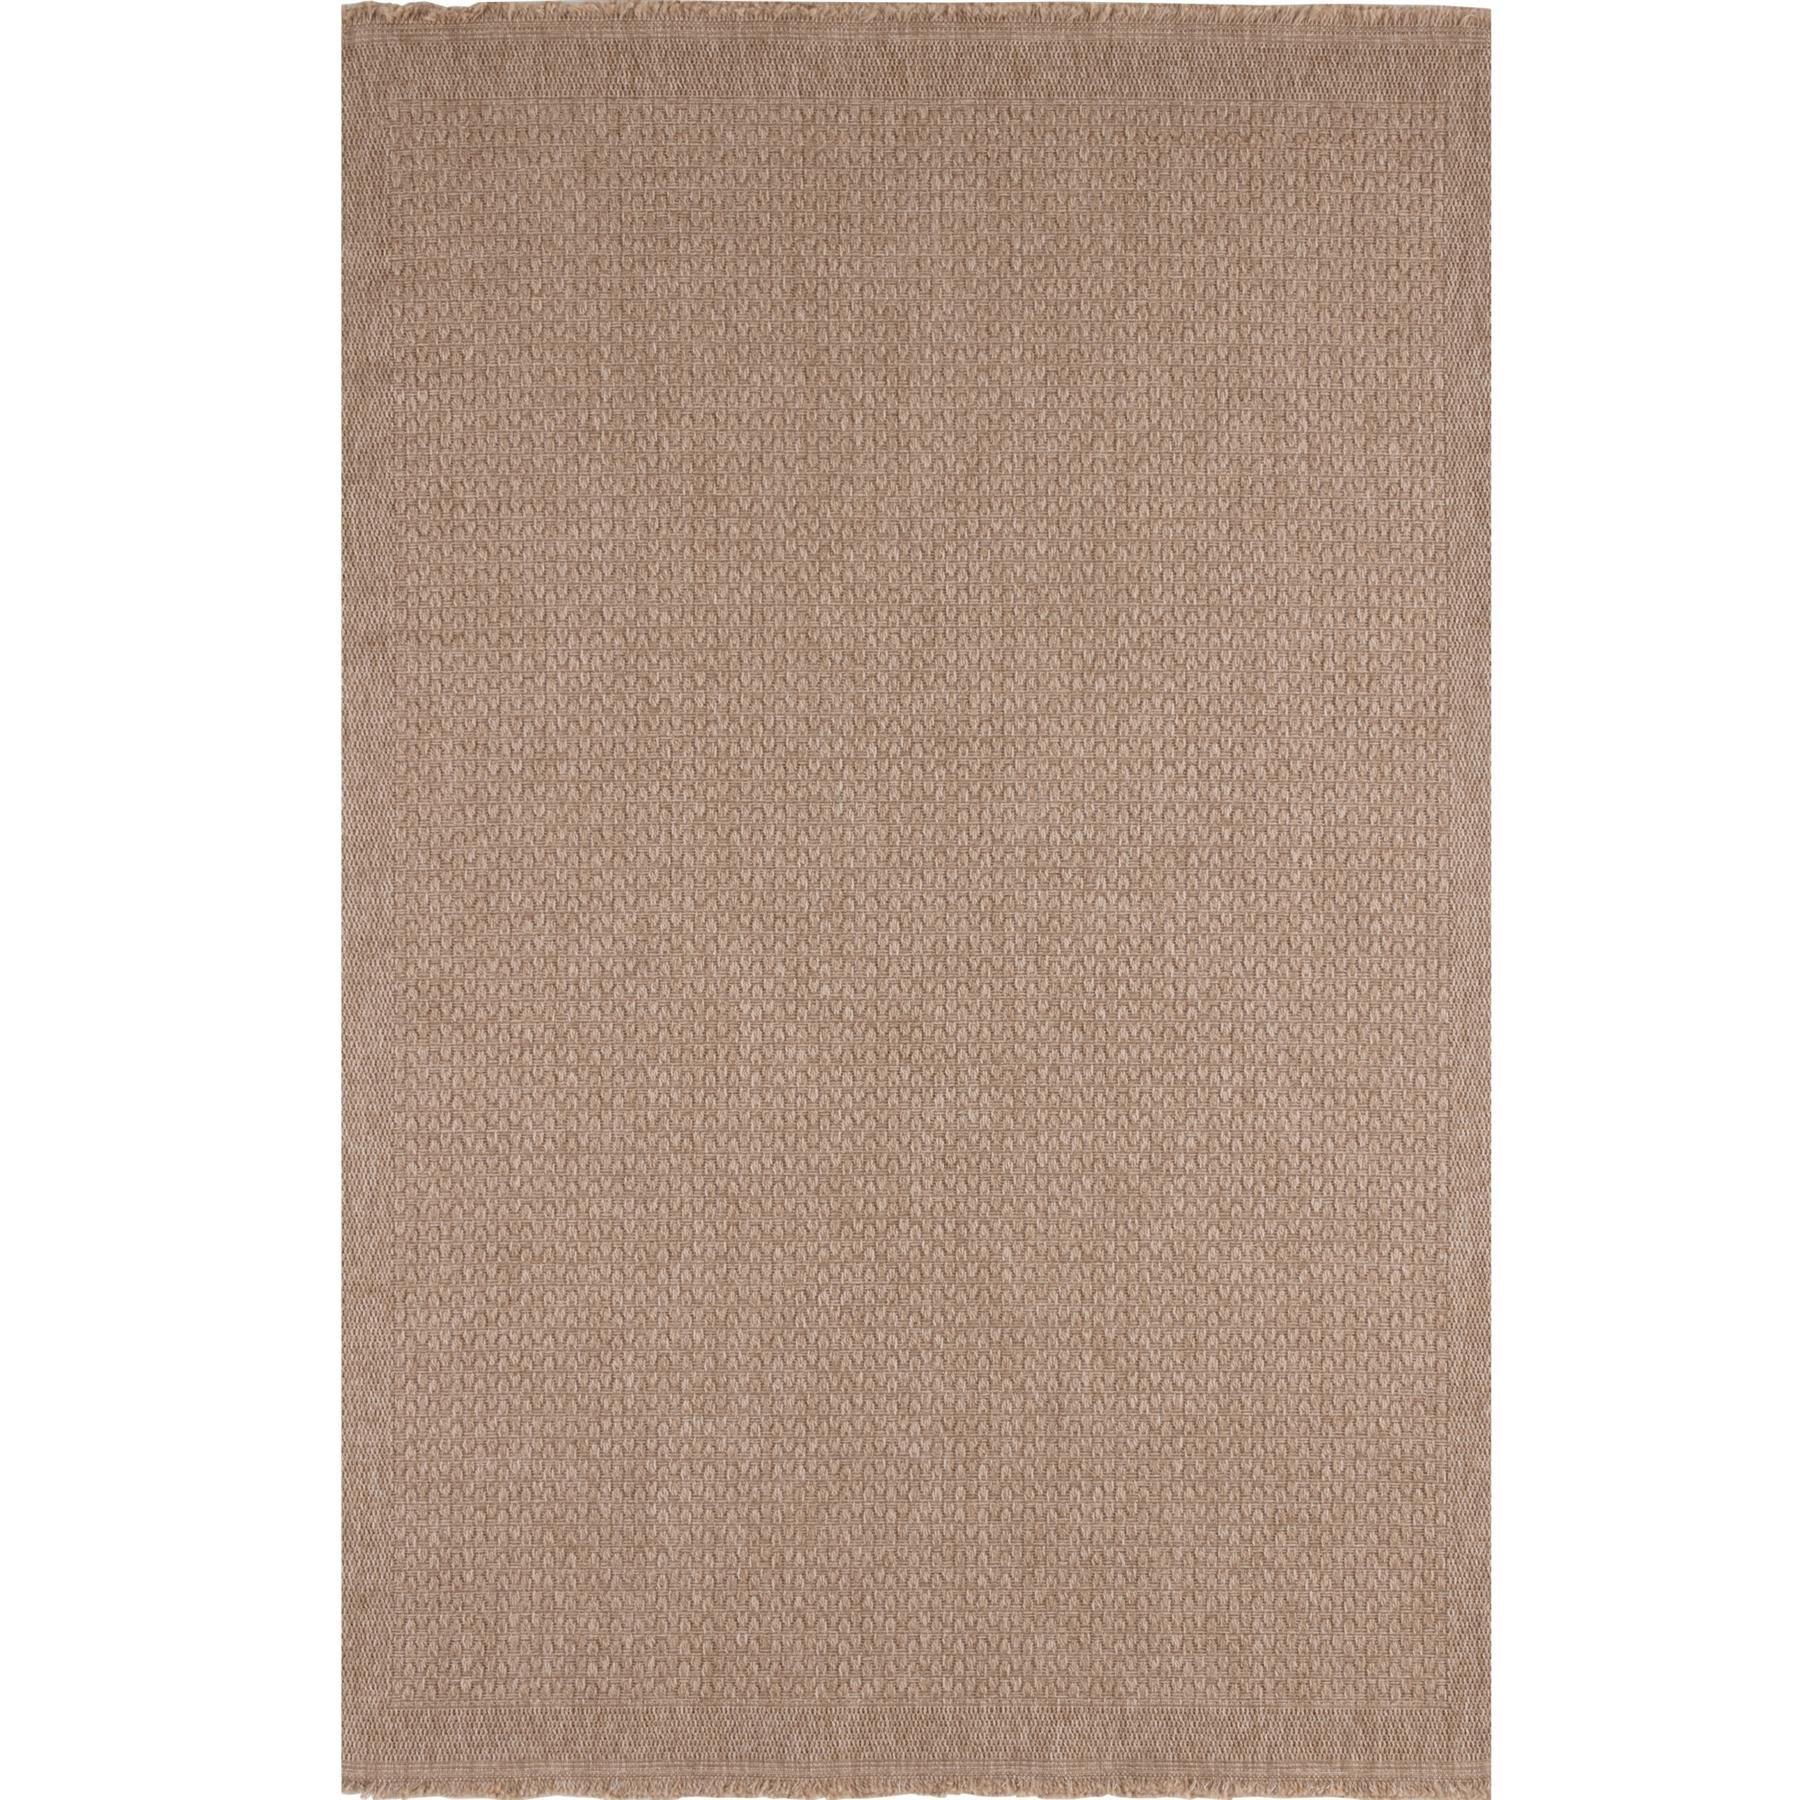 Nature Collection Outdoor Rug in Neutral - 5000N